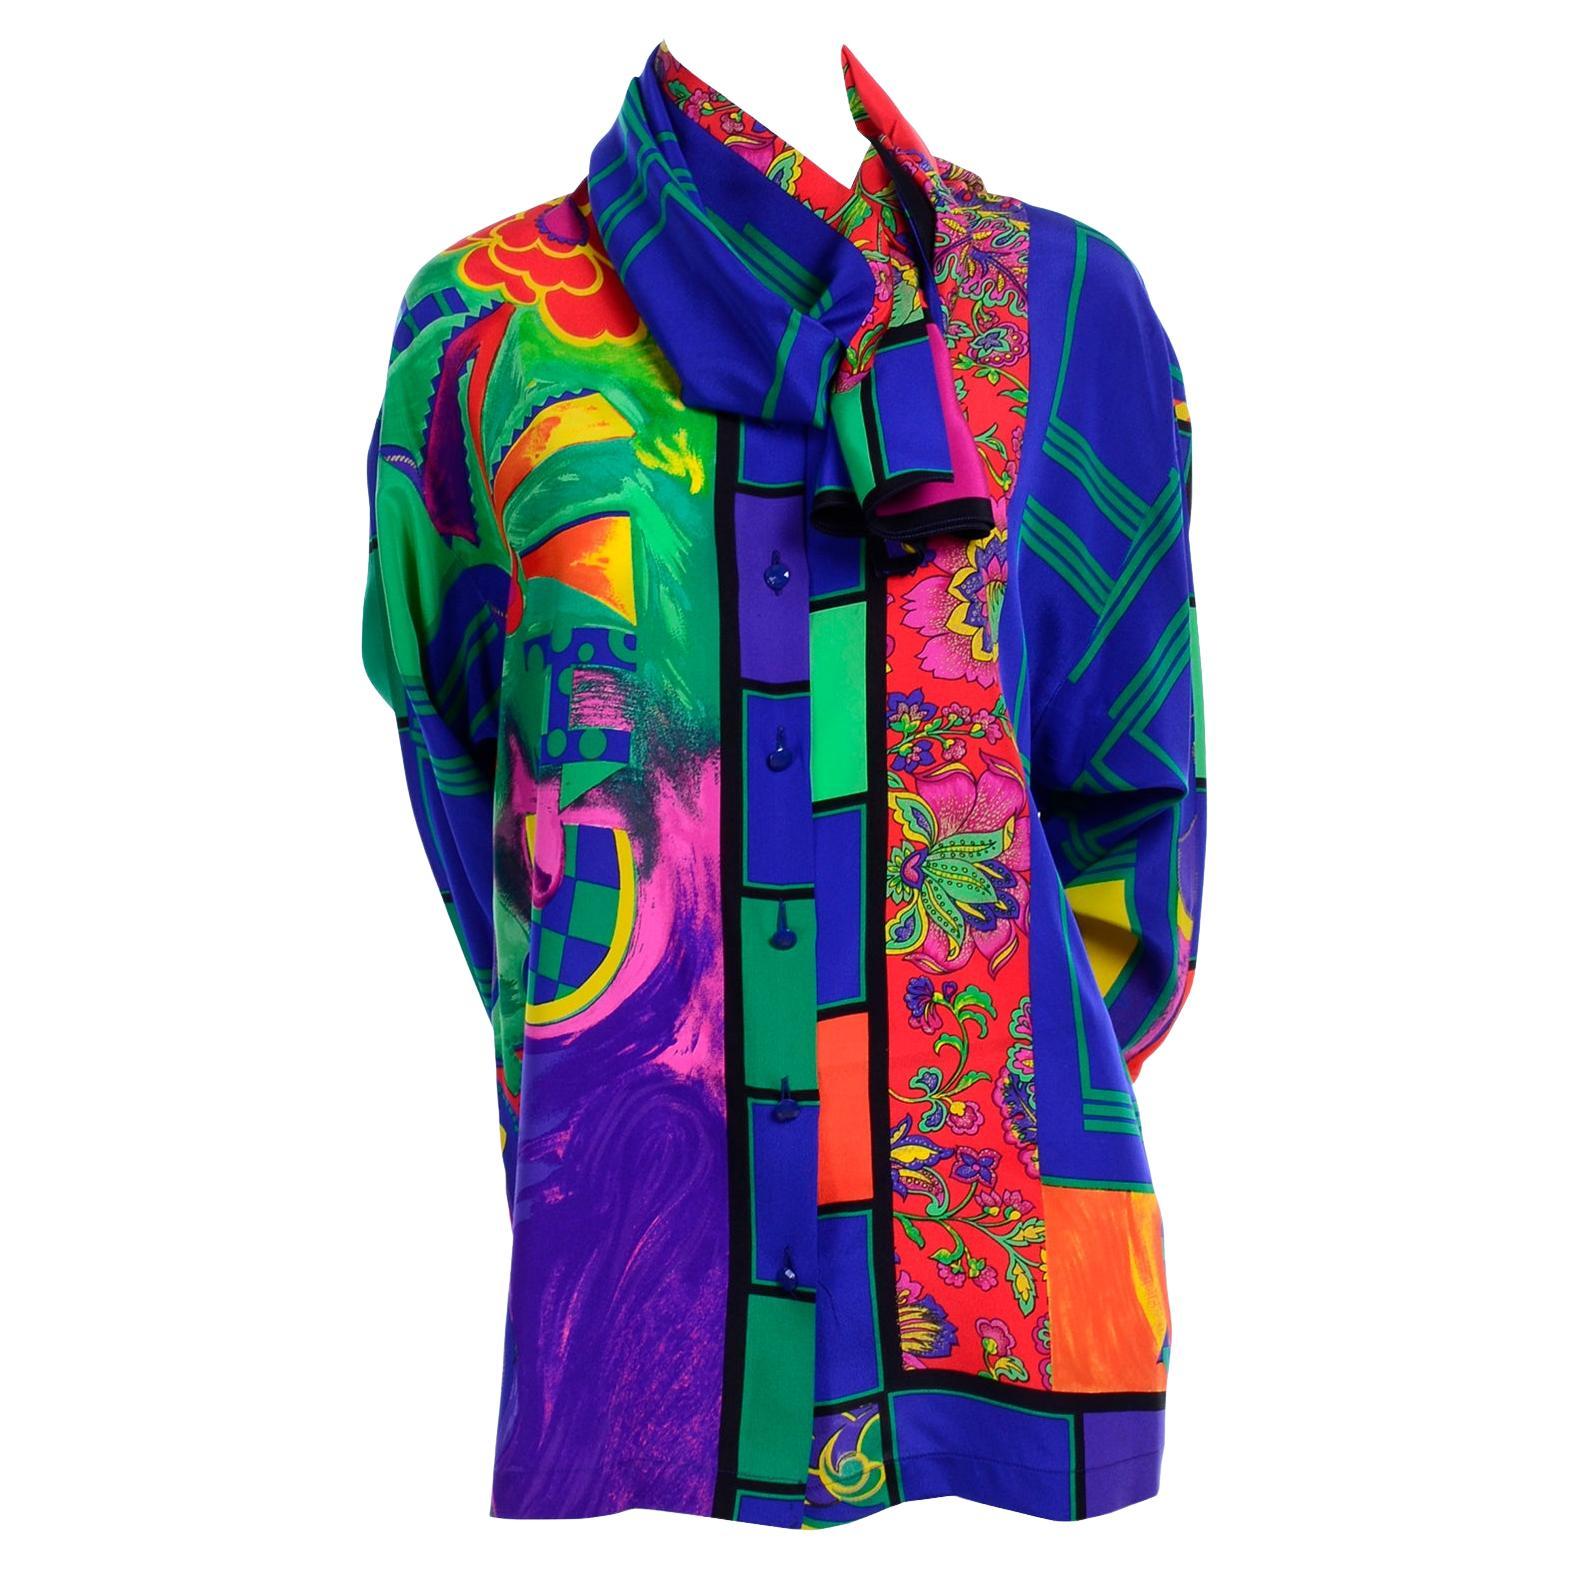 Gianni Versace Early 1990s Bright Colorful Vintage Silk Print Shirt & Huge Scarf For Sale